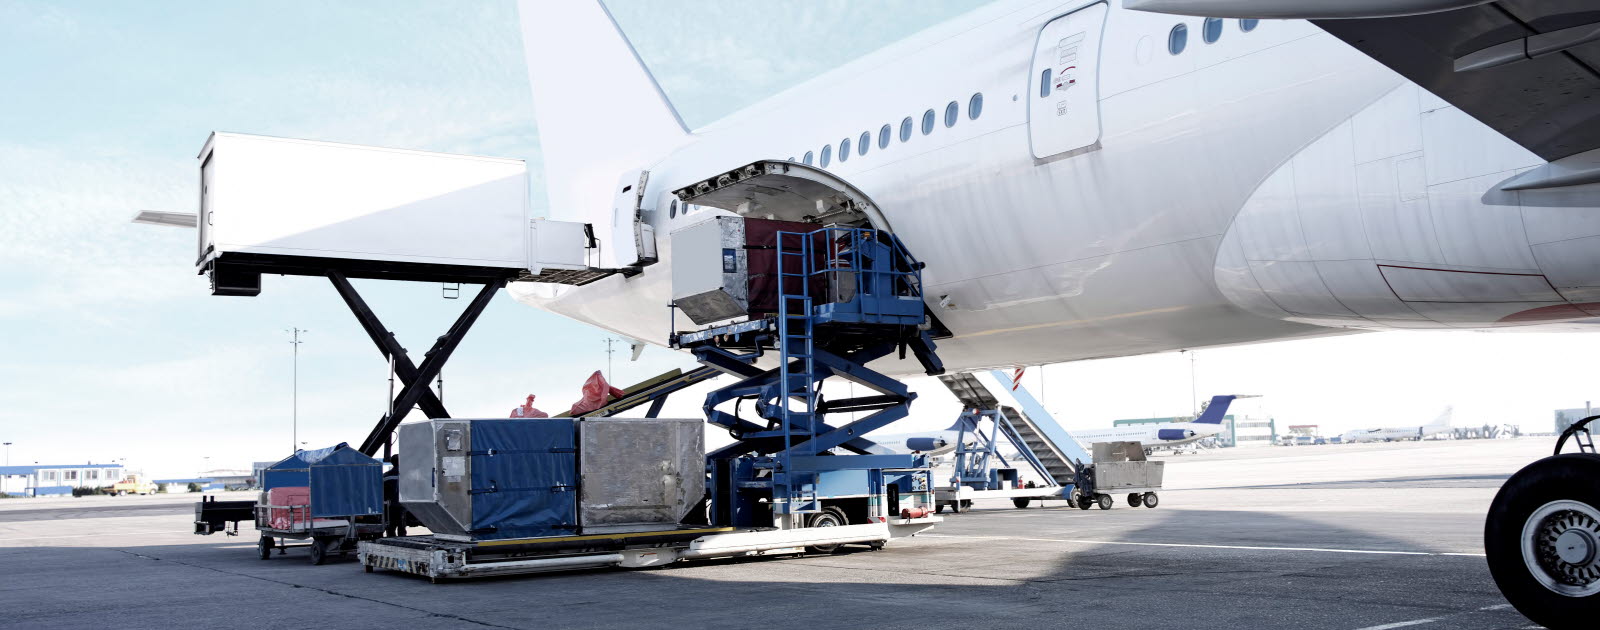 Loading cargo into an airplane